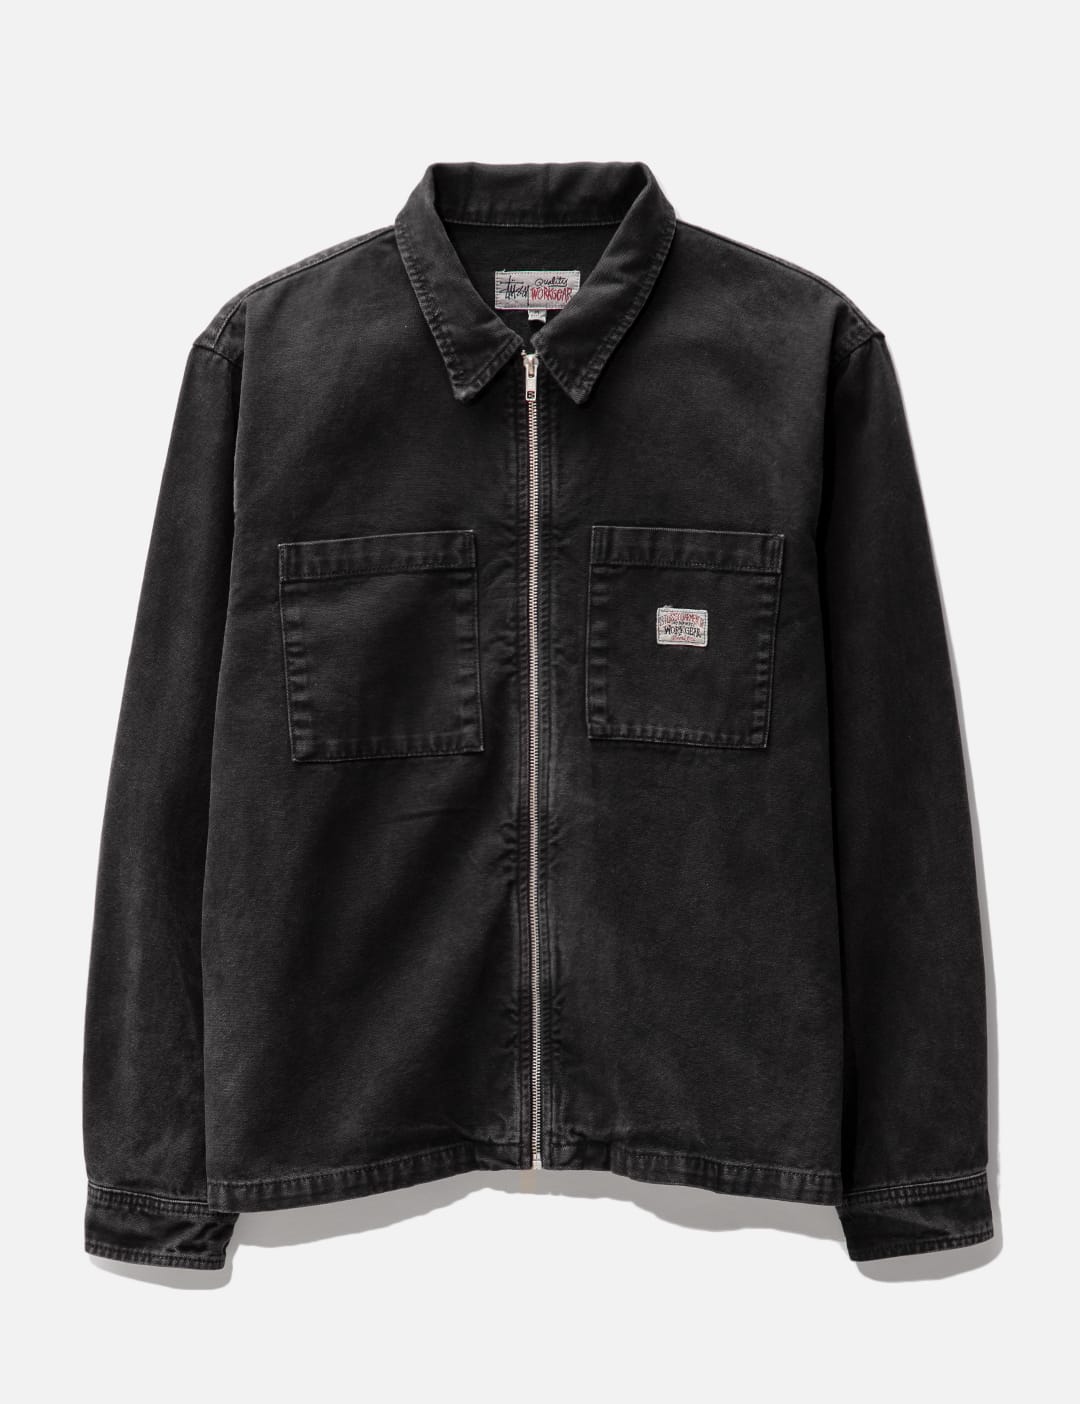 Stüssy   Washed Canvas Zip Shirt   HBX   Globally Curated Fashion